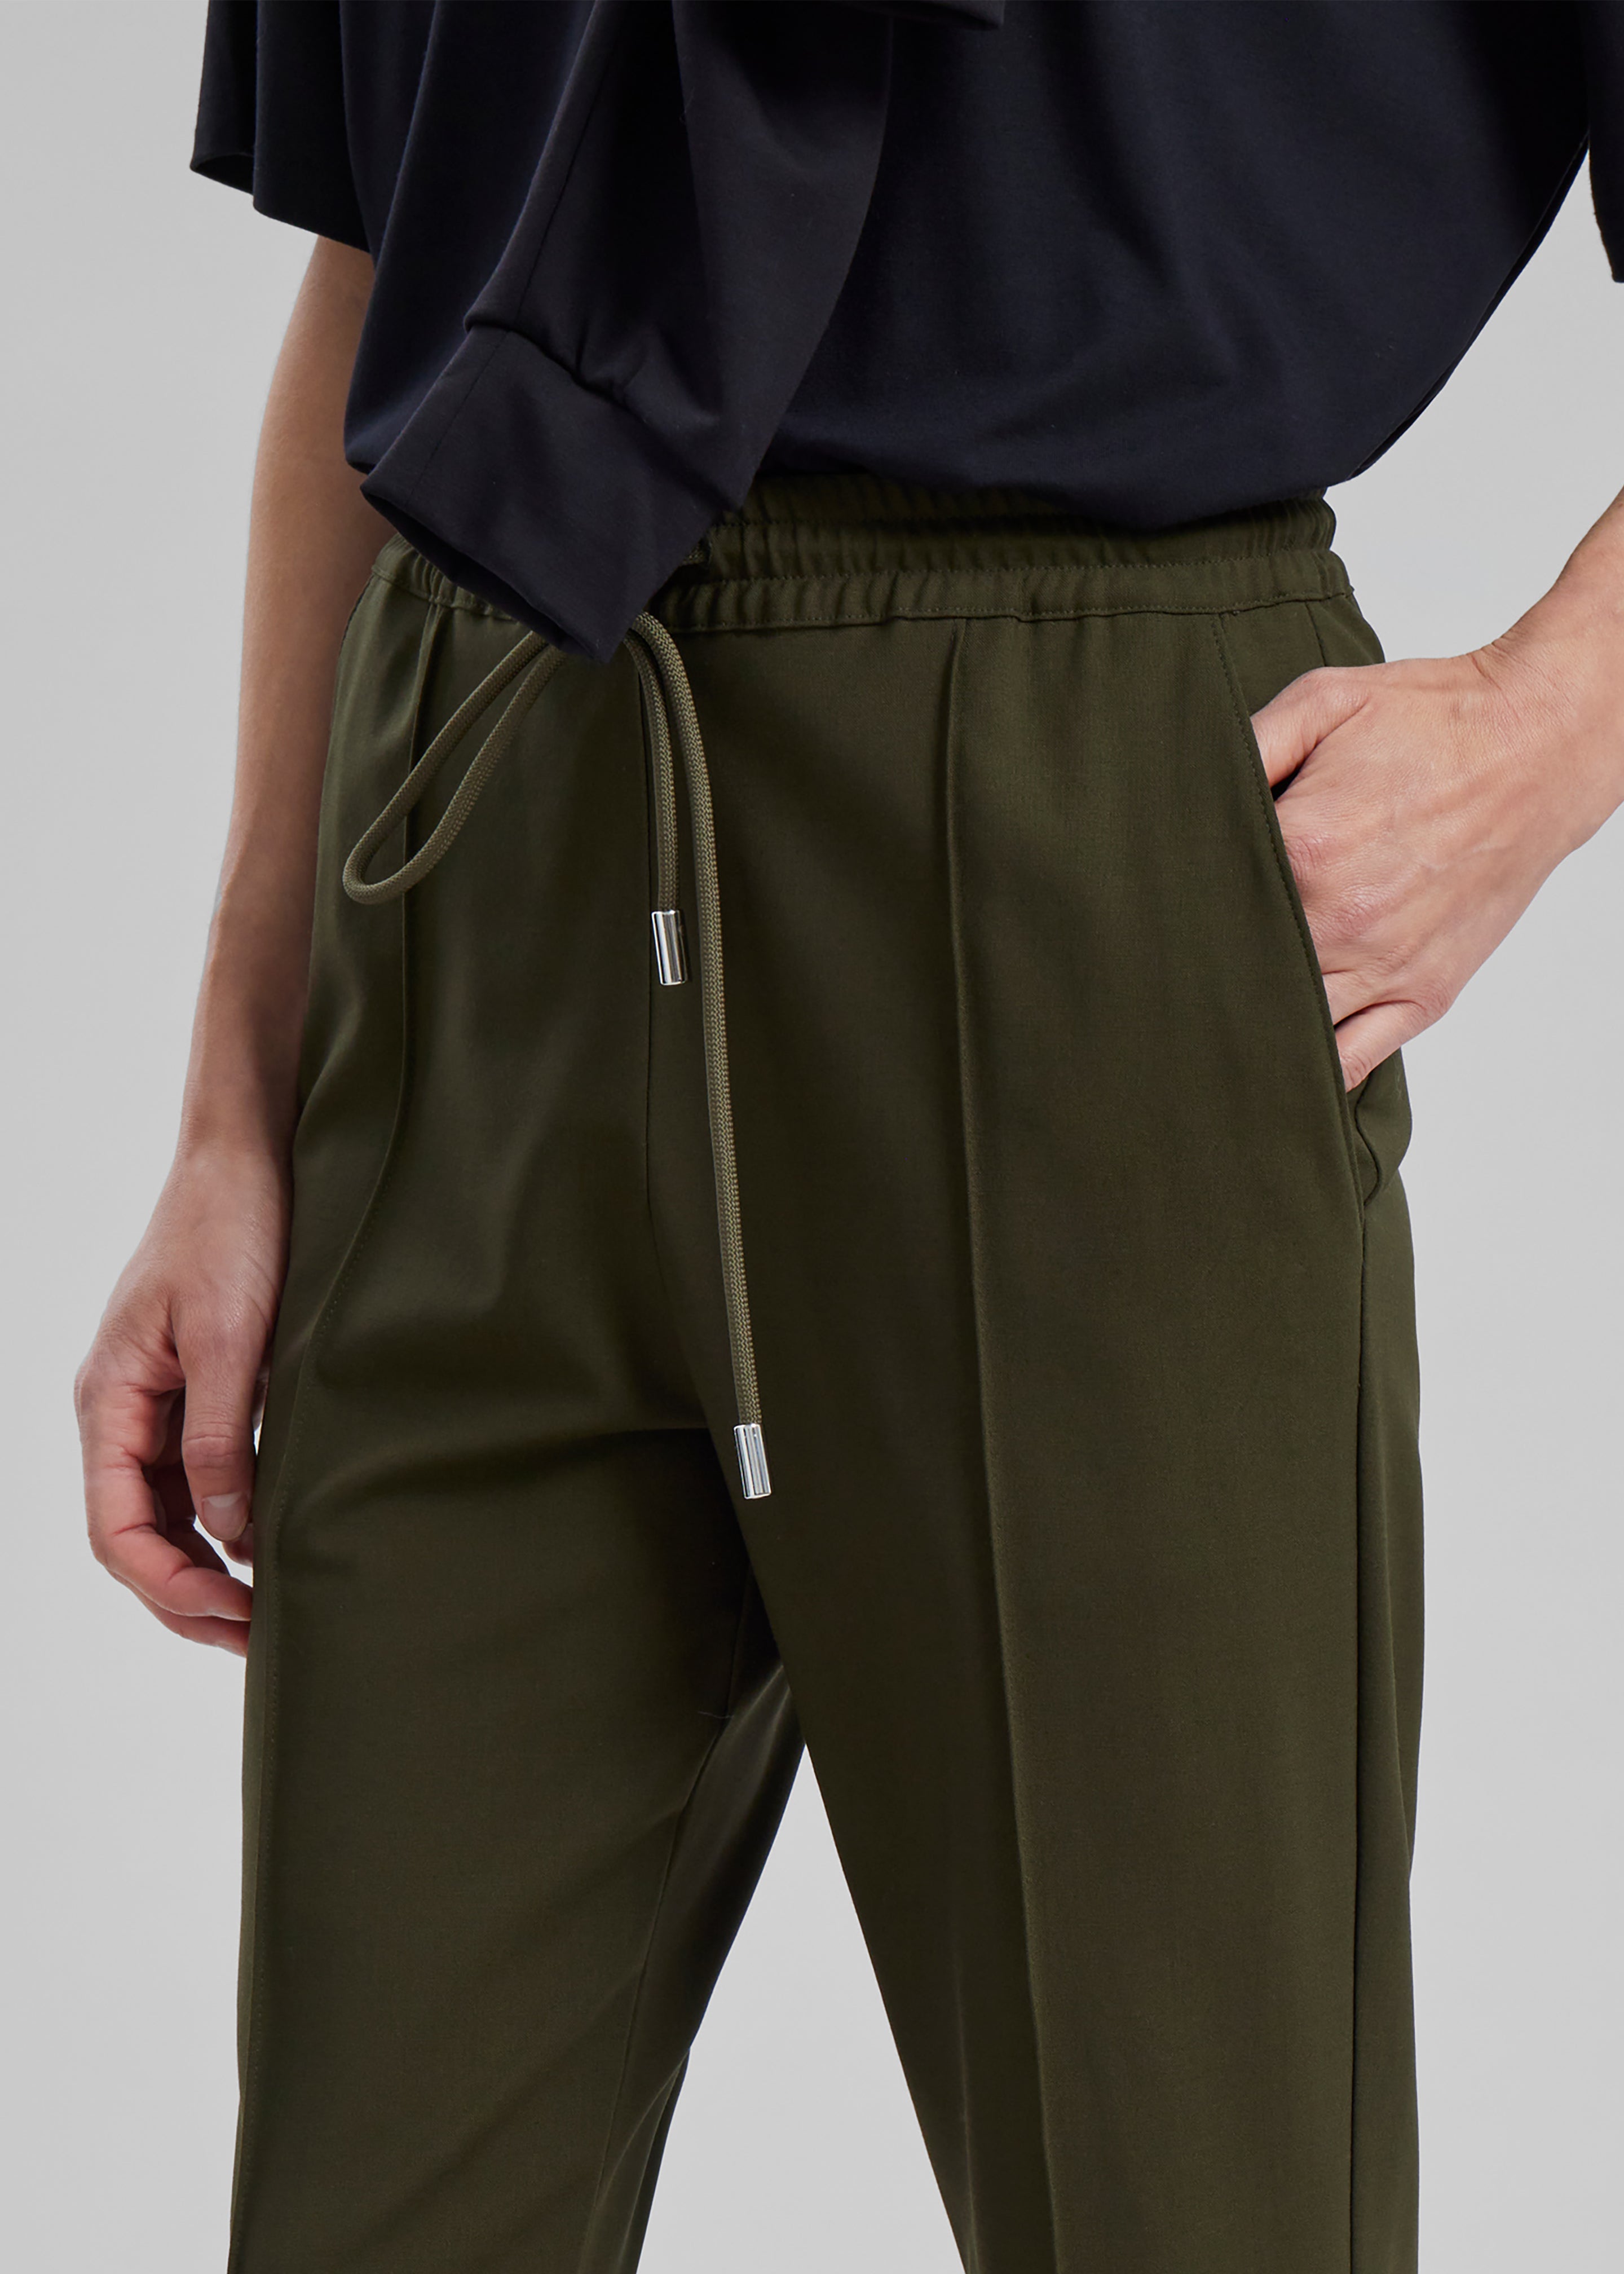 JW Anderson Drawstring Waist Tailored Trousers - Olive - 7